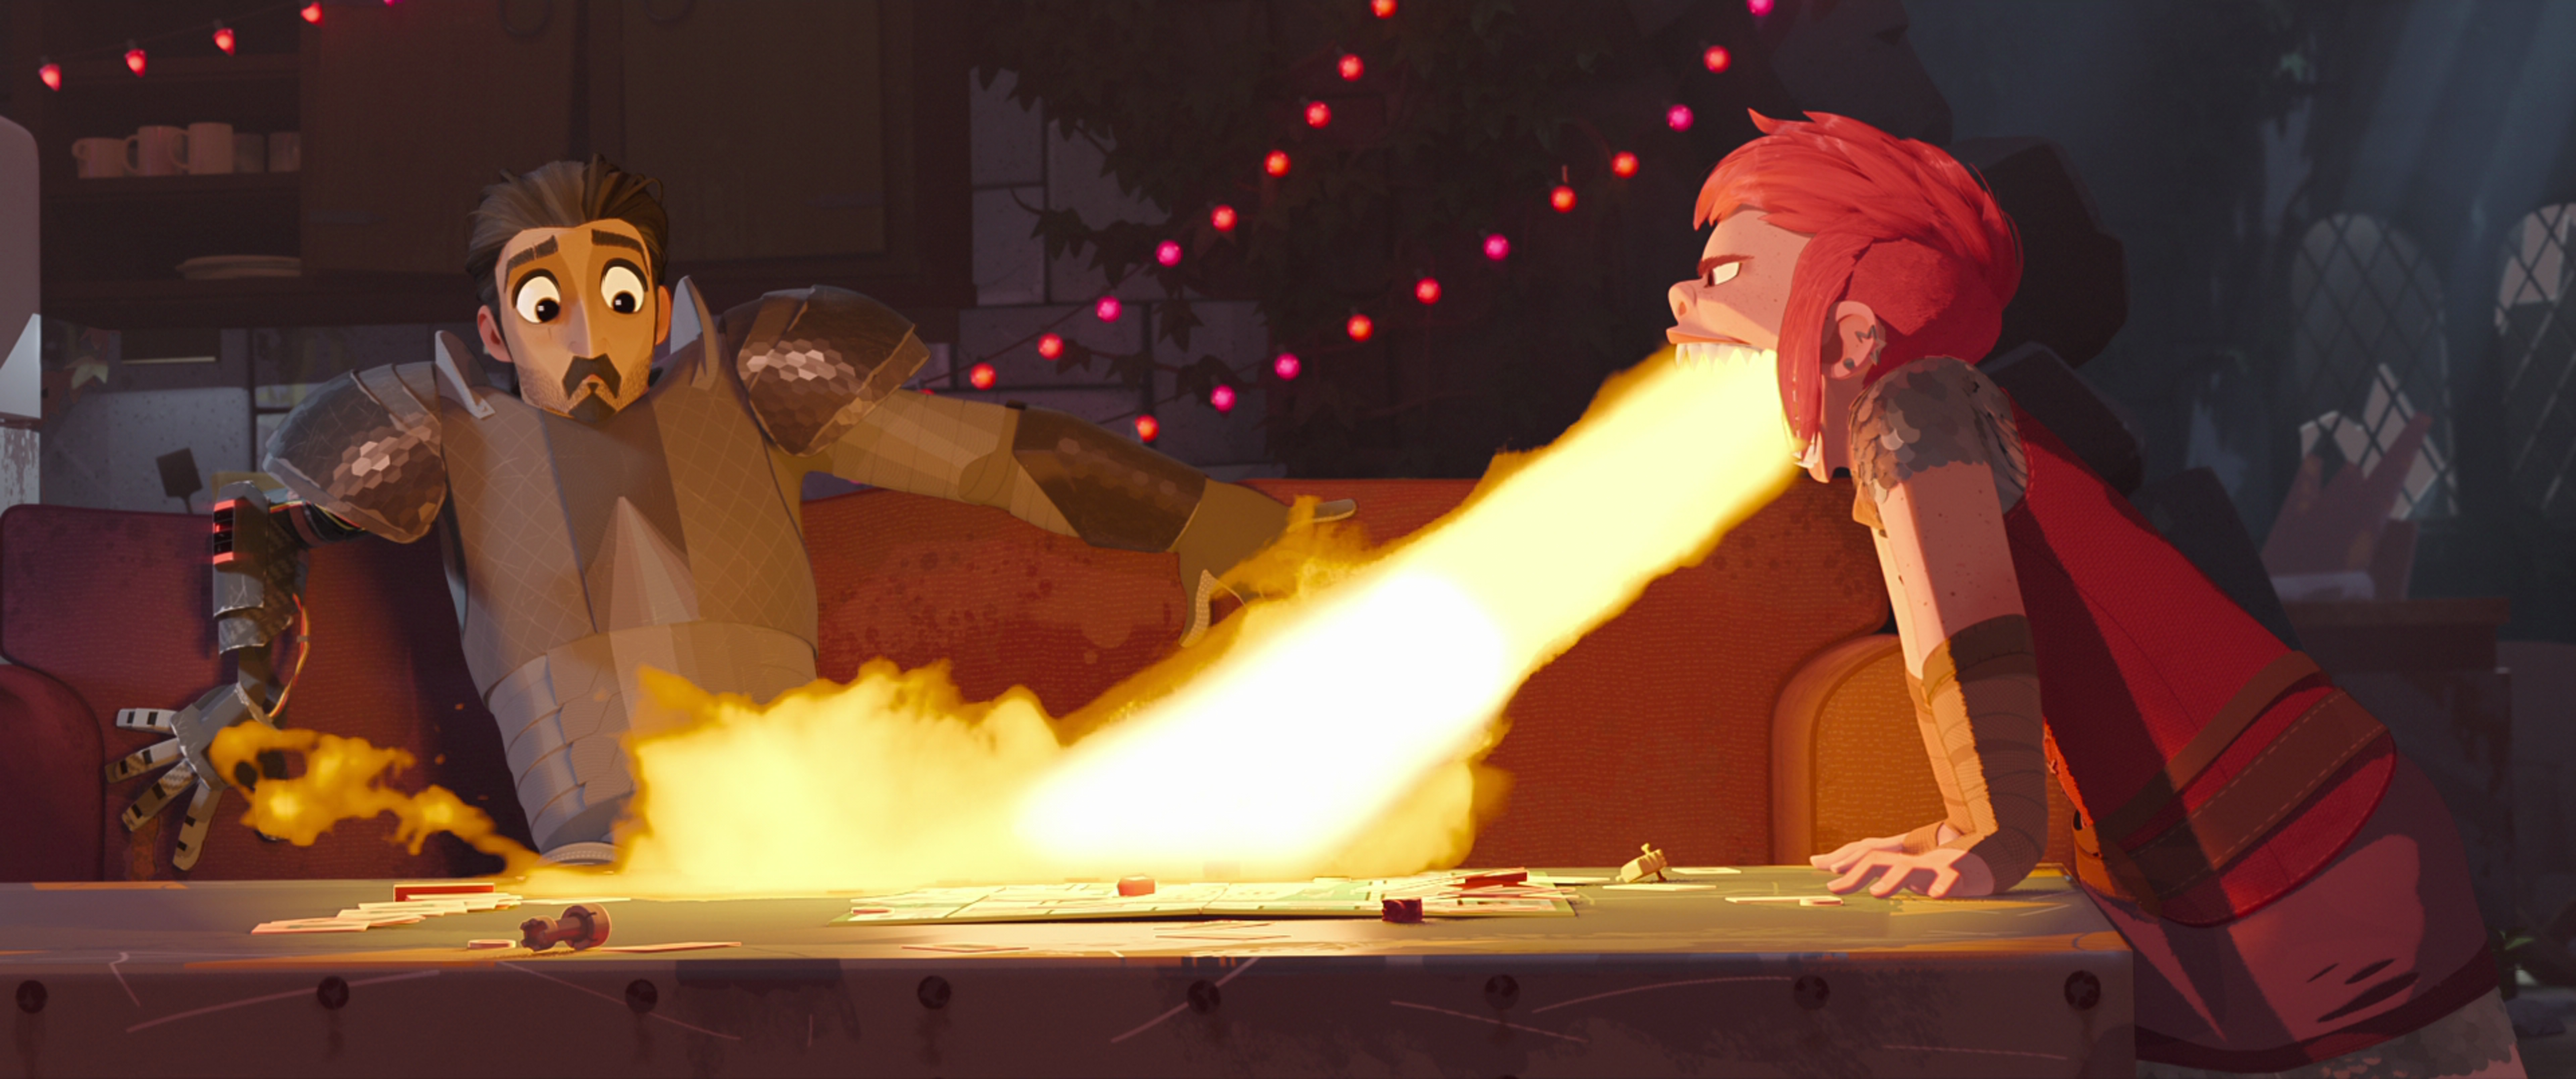 Ballister Boldheart, a dark-haired, goateed man, recoils as Nimona, a red-haired girl, opens her mouth freakishly wide and spits a giant blast of fire all over the table between them in Netflix’s animated movie Nimona